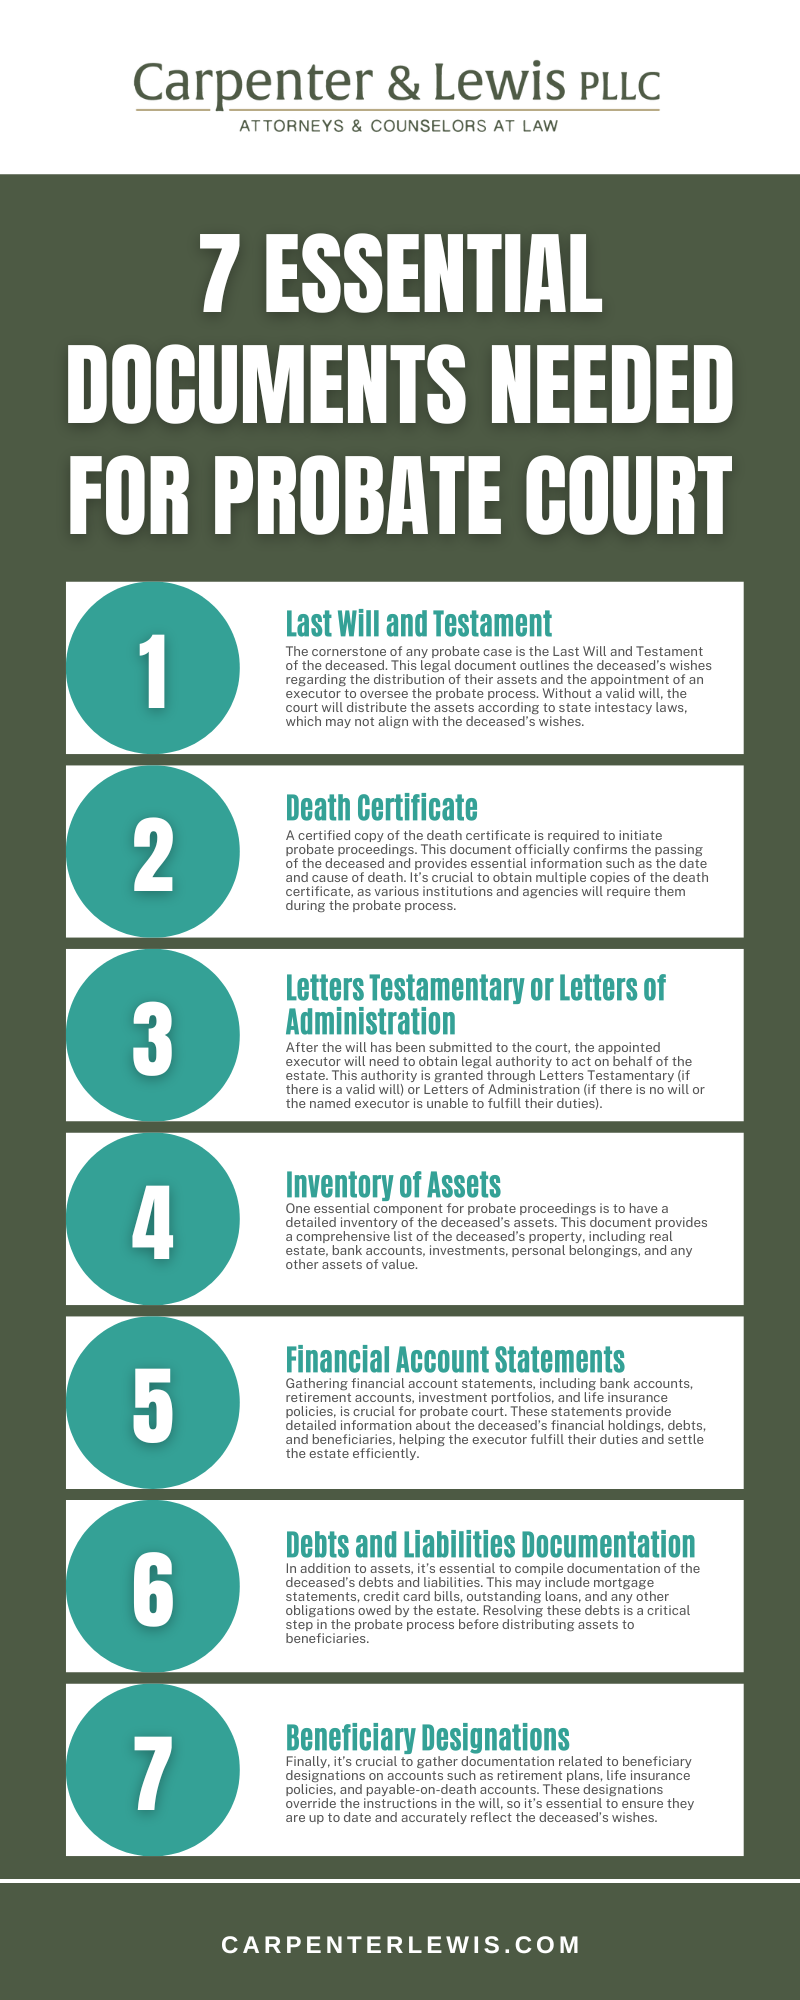 7 Essential Documents Needed For Probate Court Infographic